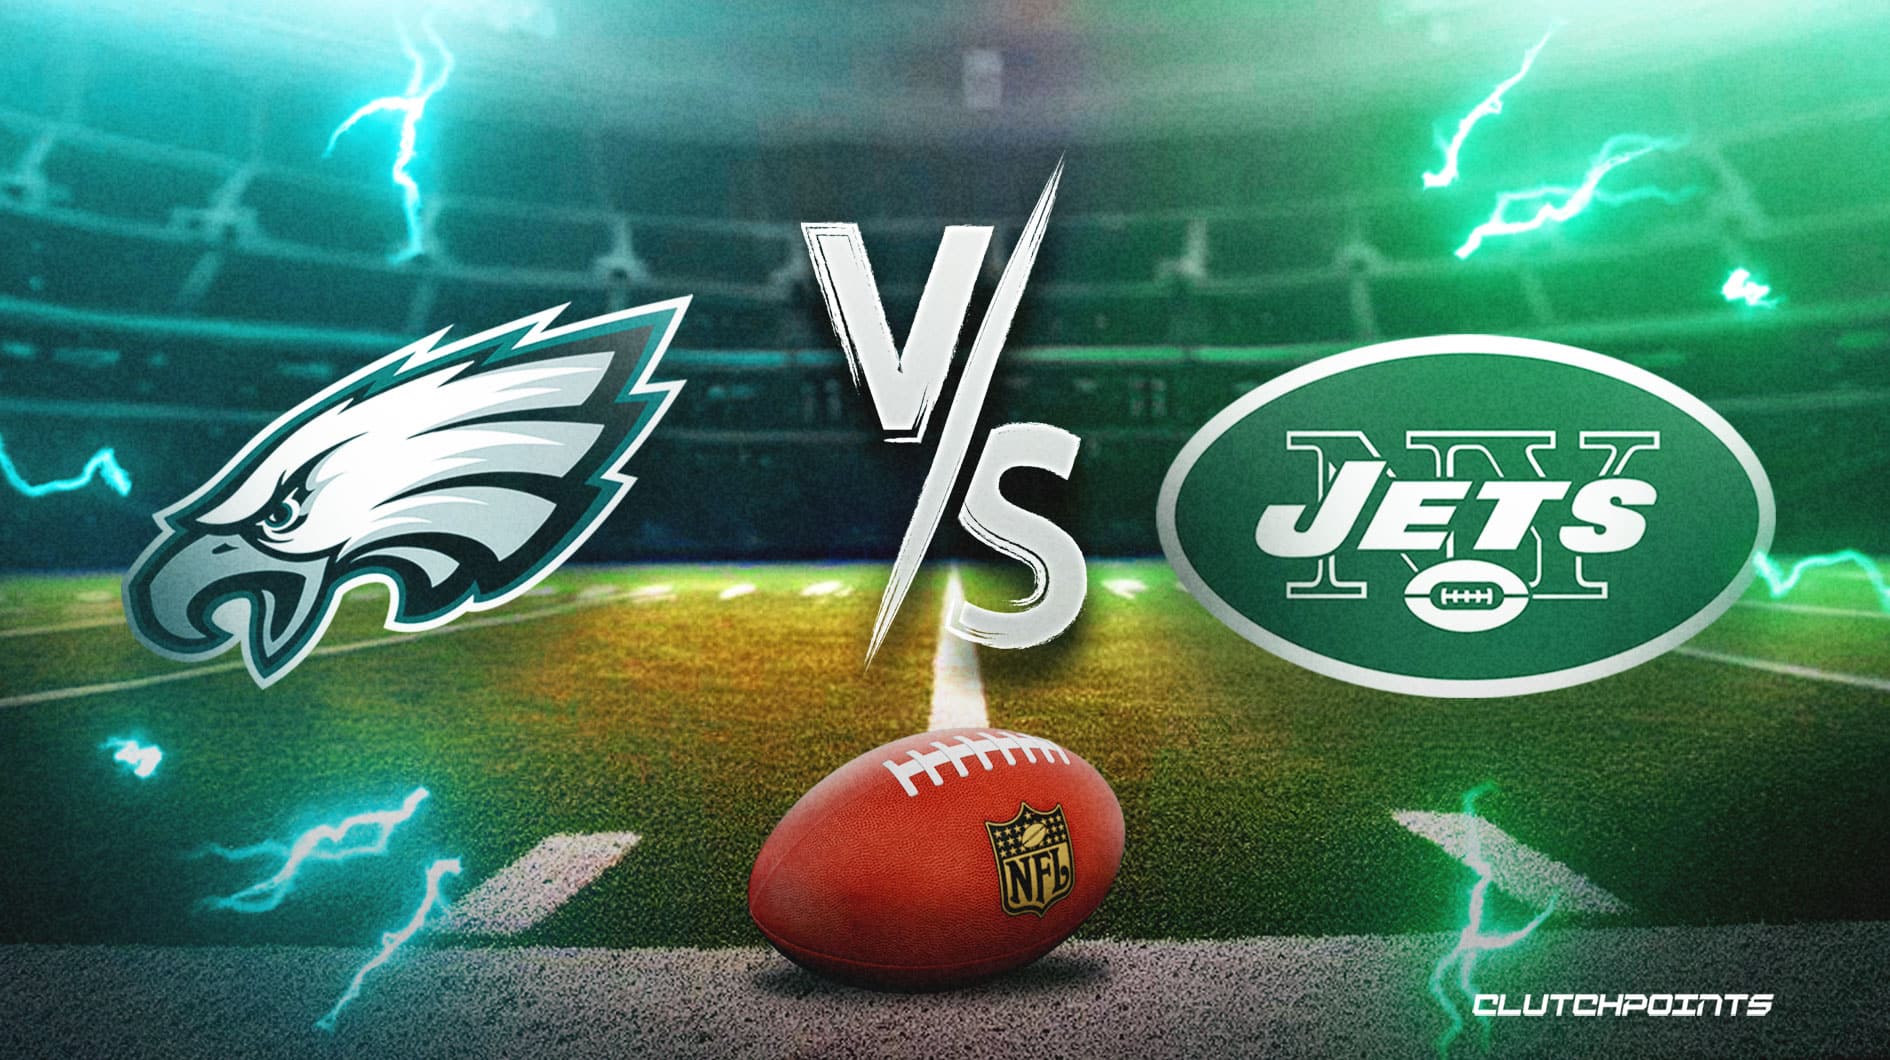 EaglesJets prediction, odds, pick, how to watch NFL Week 6 game